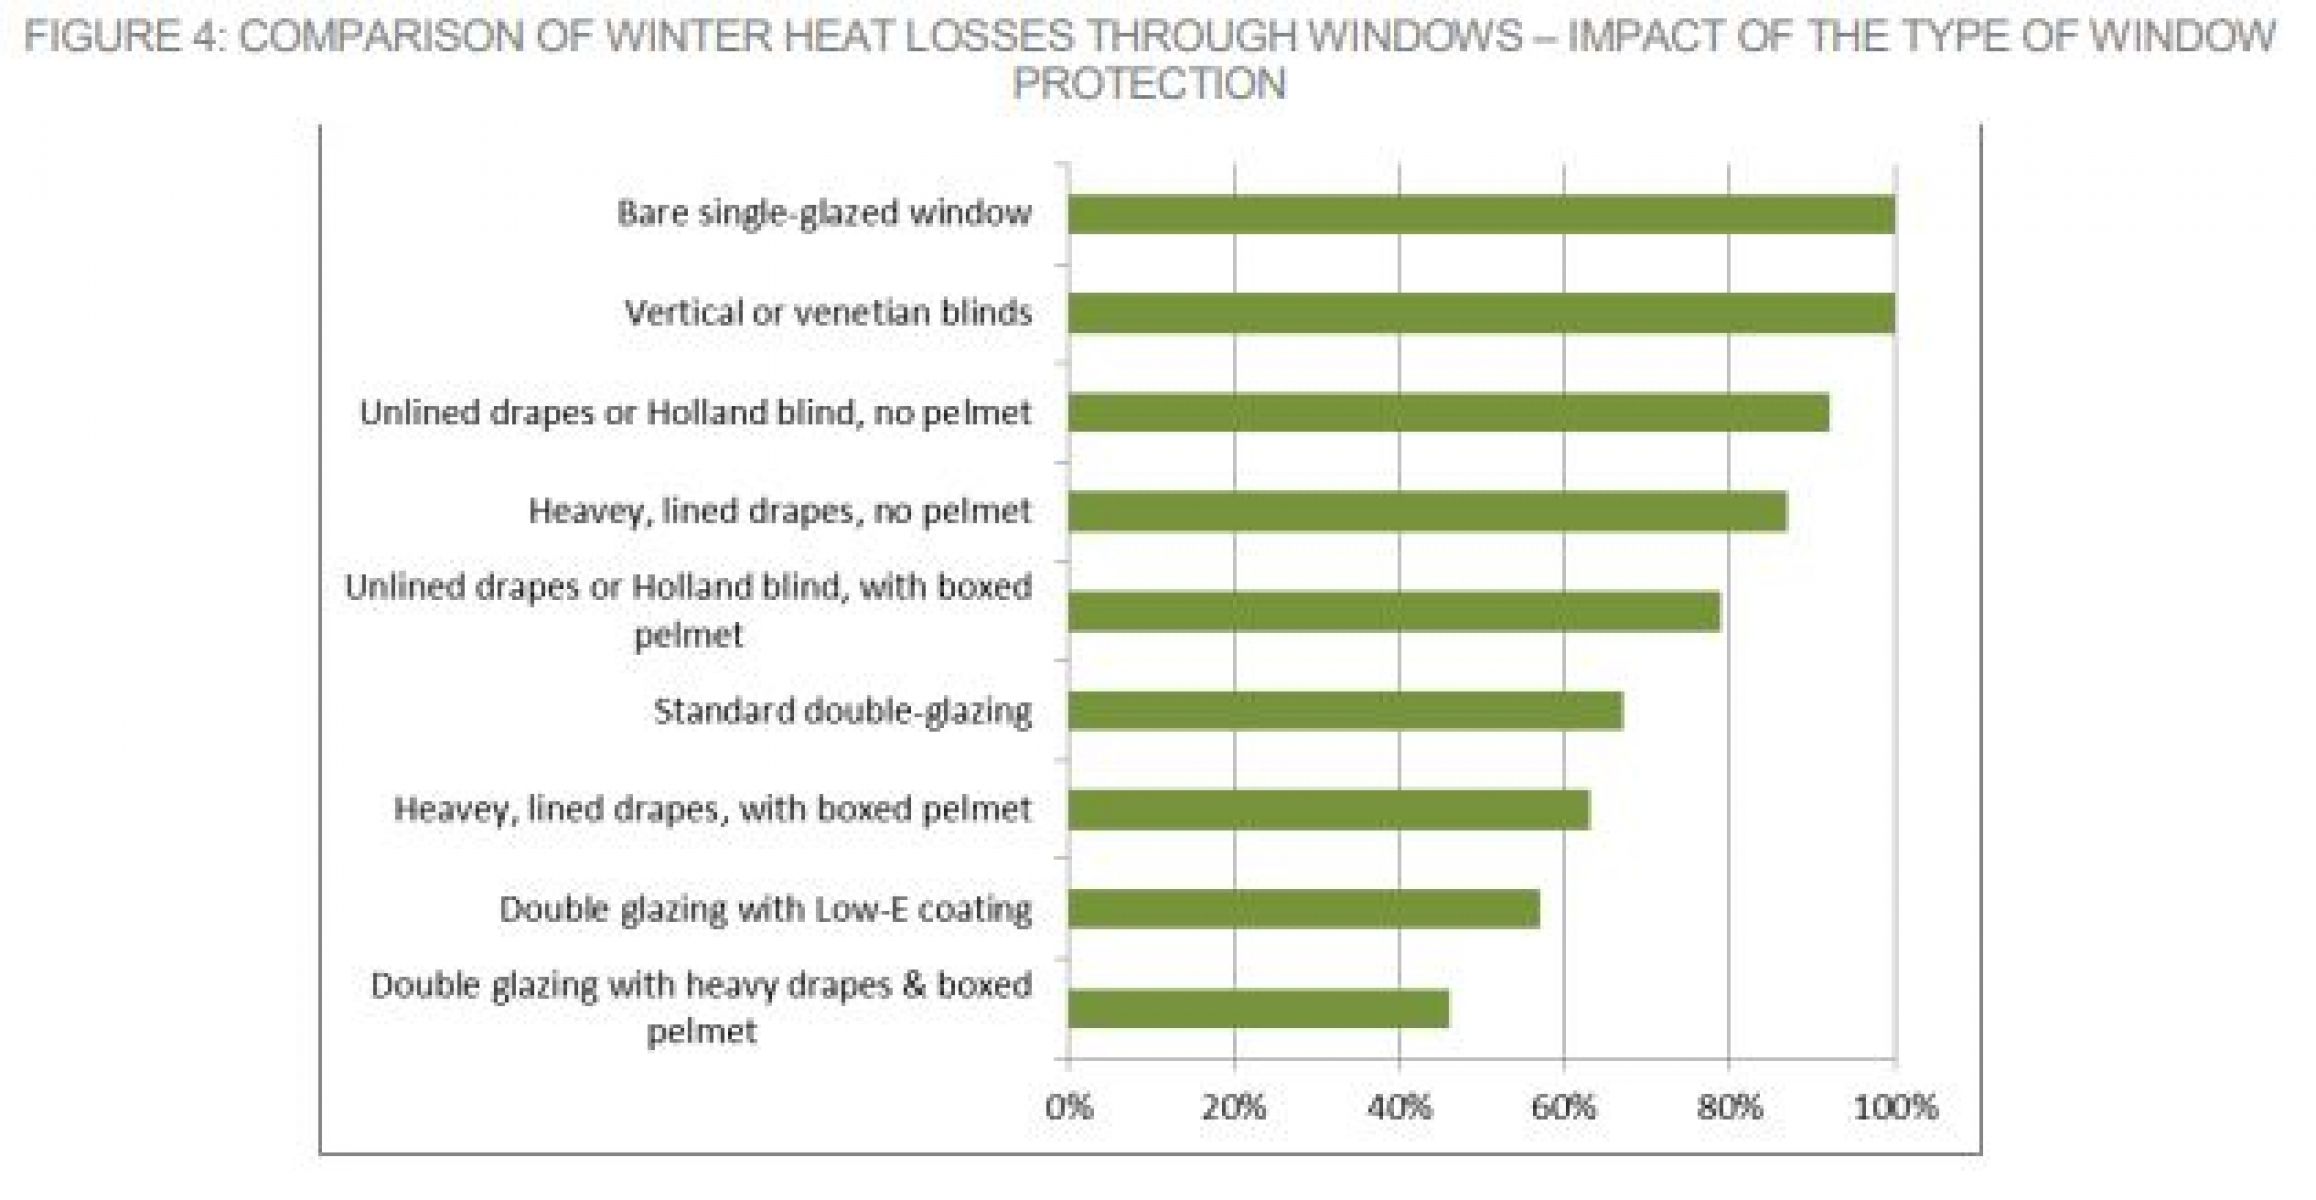 Image of a graph showing a comparison of winter heat losses through windows and impact of the type of window protection. Bare single glazed windows 100% heat loss whereas double glazing with heavy drapes and boxed pelmets